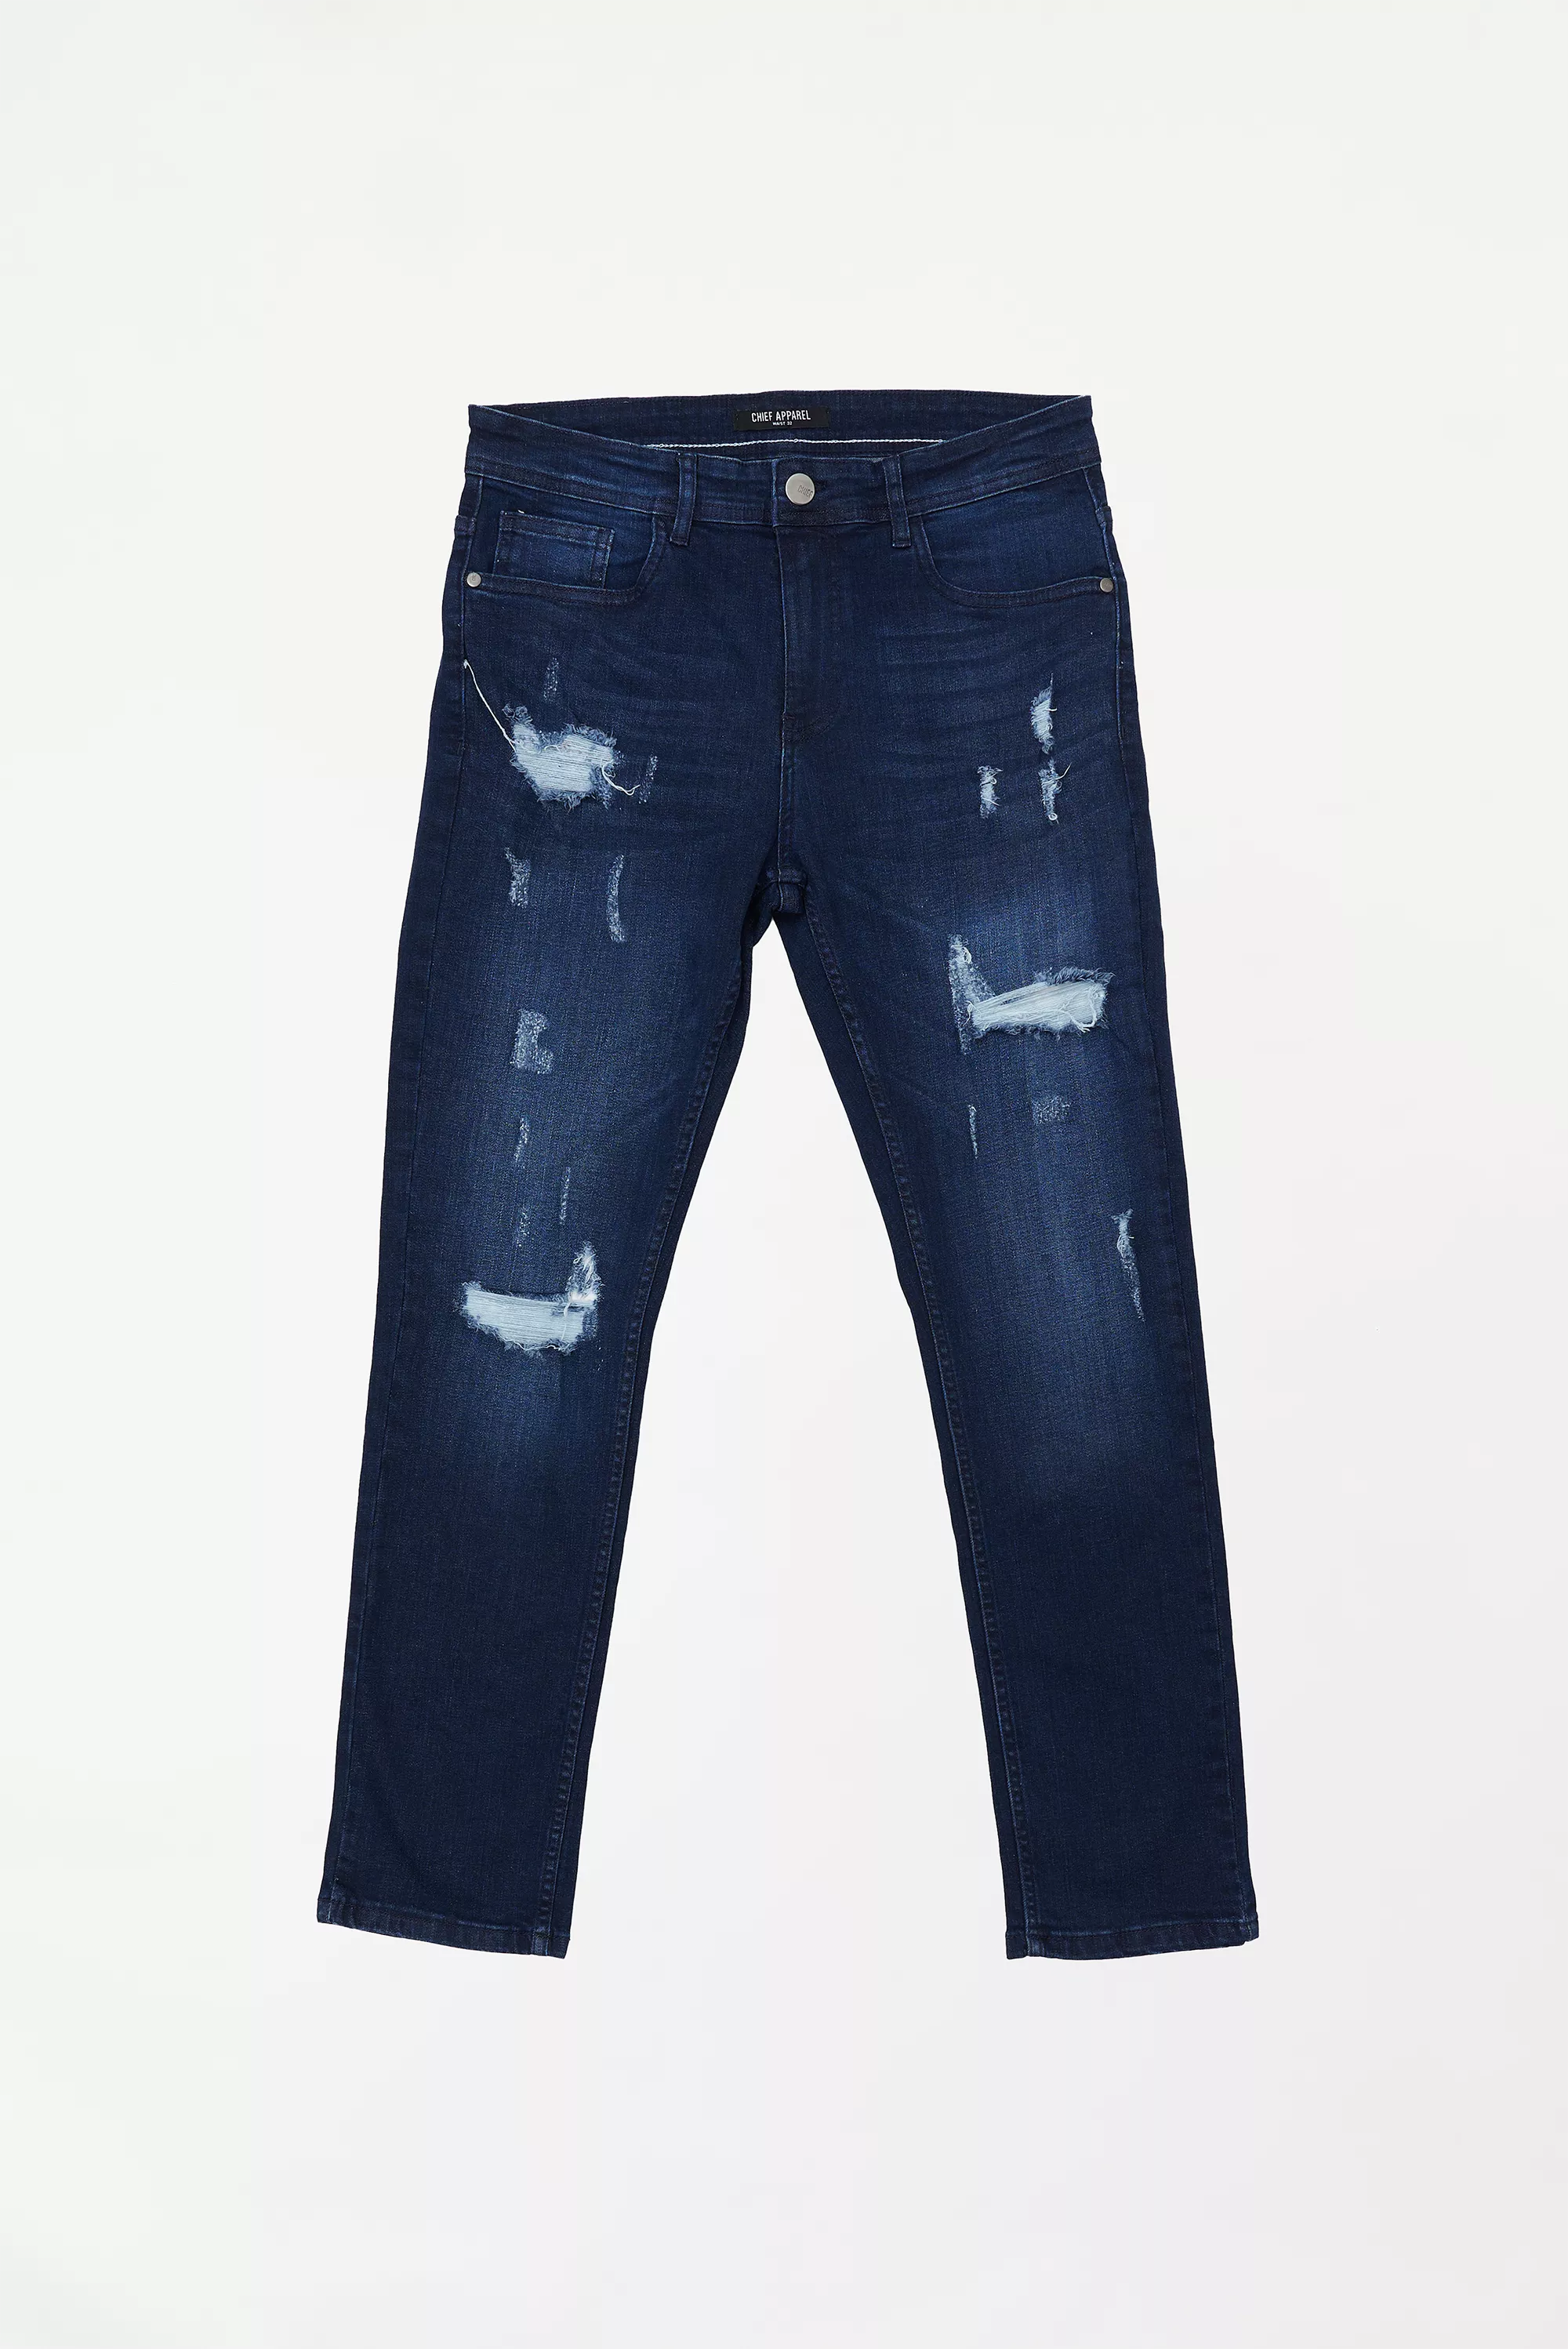 Men's Ripped Tapered Fit Blue Jeans